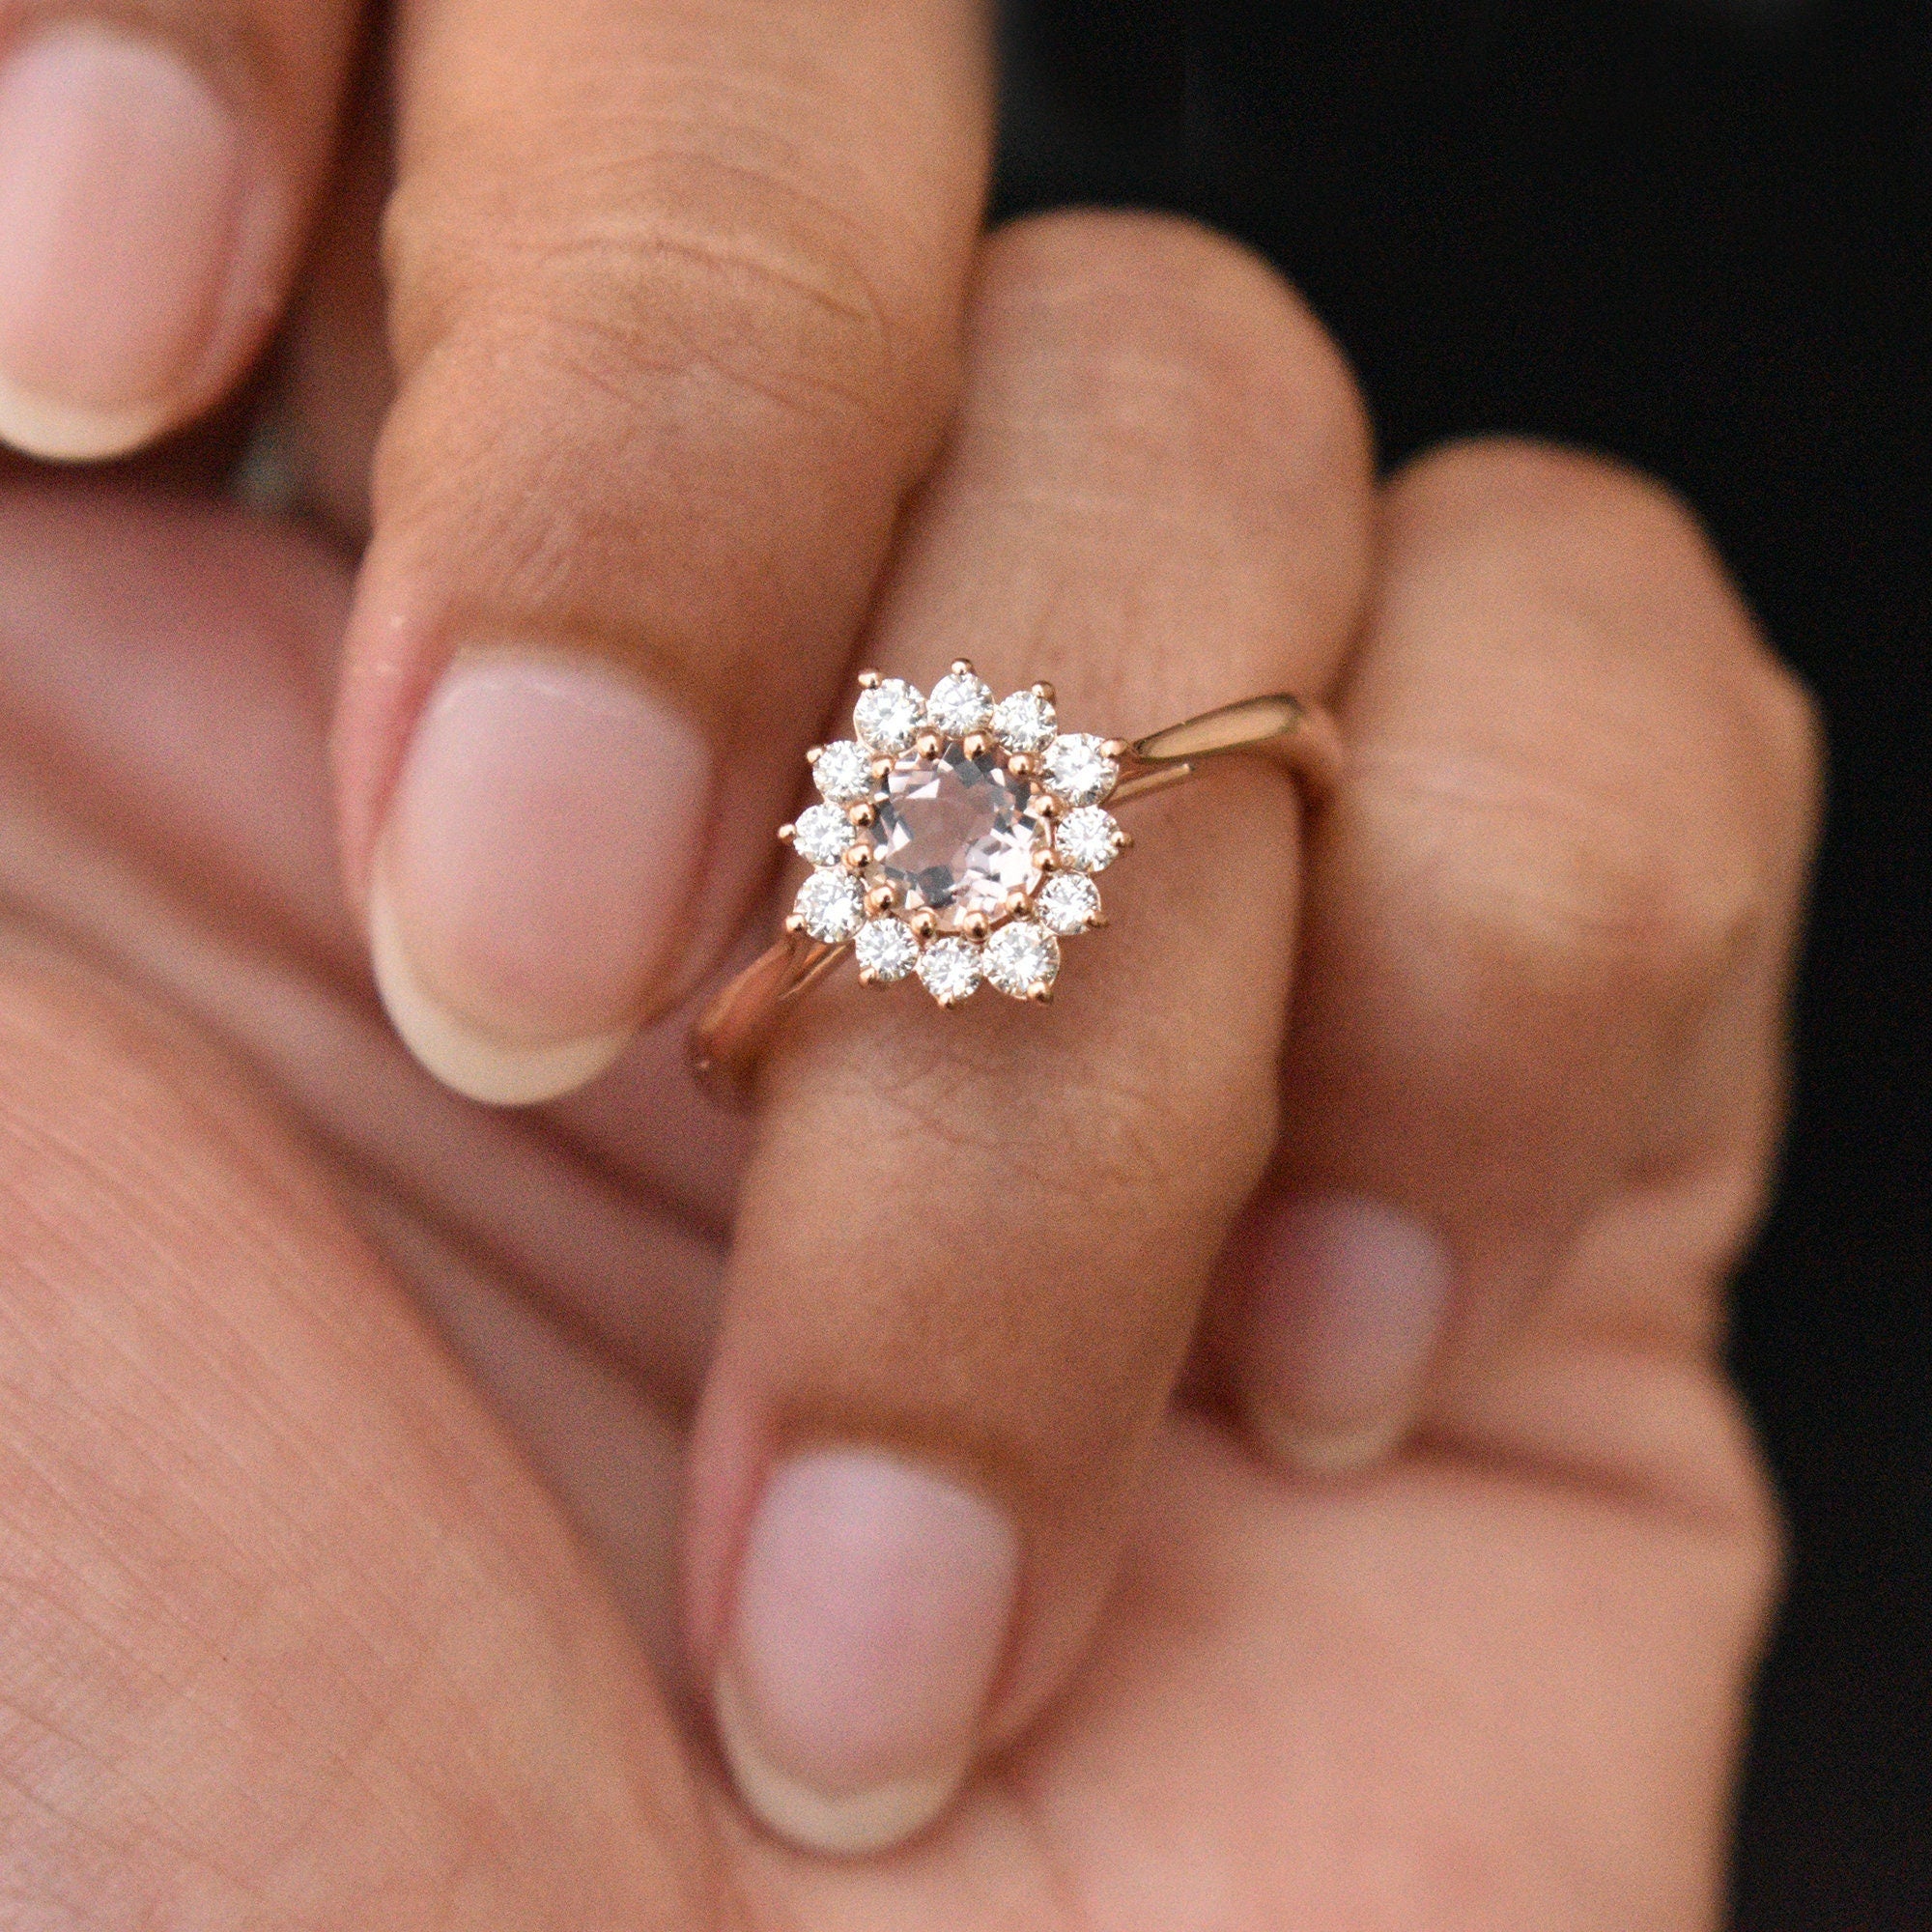 Morganite & Diamond Halo Engagement Ring, 14K Solid Gold Flower Cluster Ring, Unique Halo Cathedral Proposal Ring, Alternative Bridal Floral